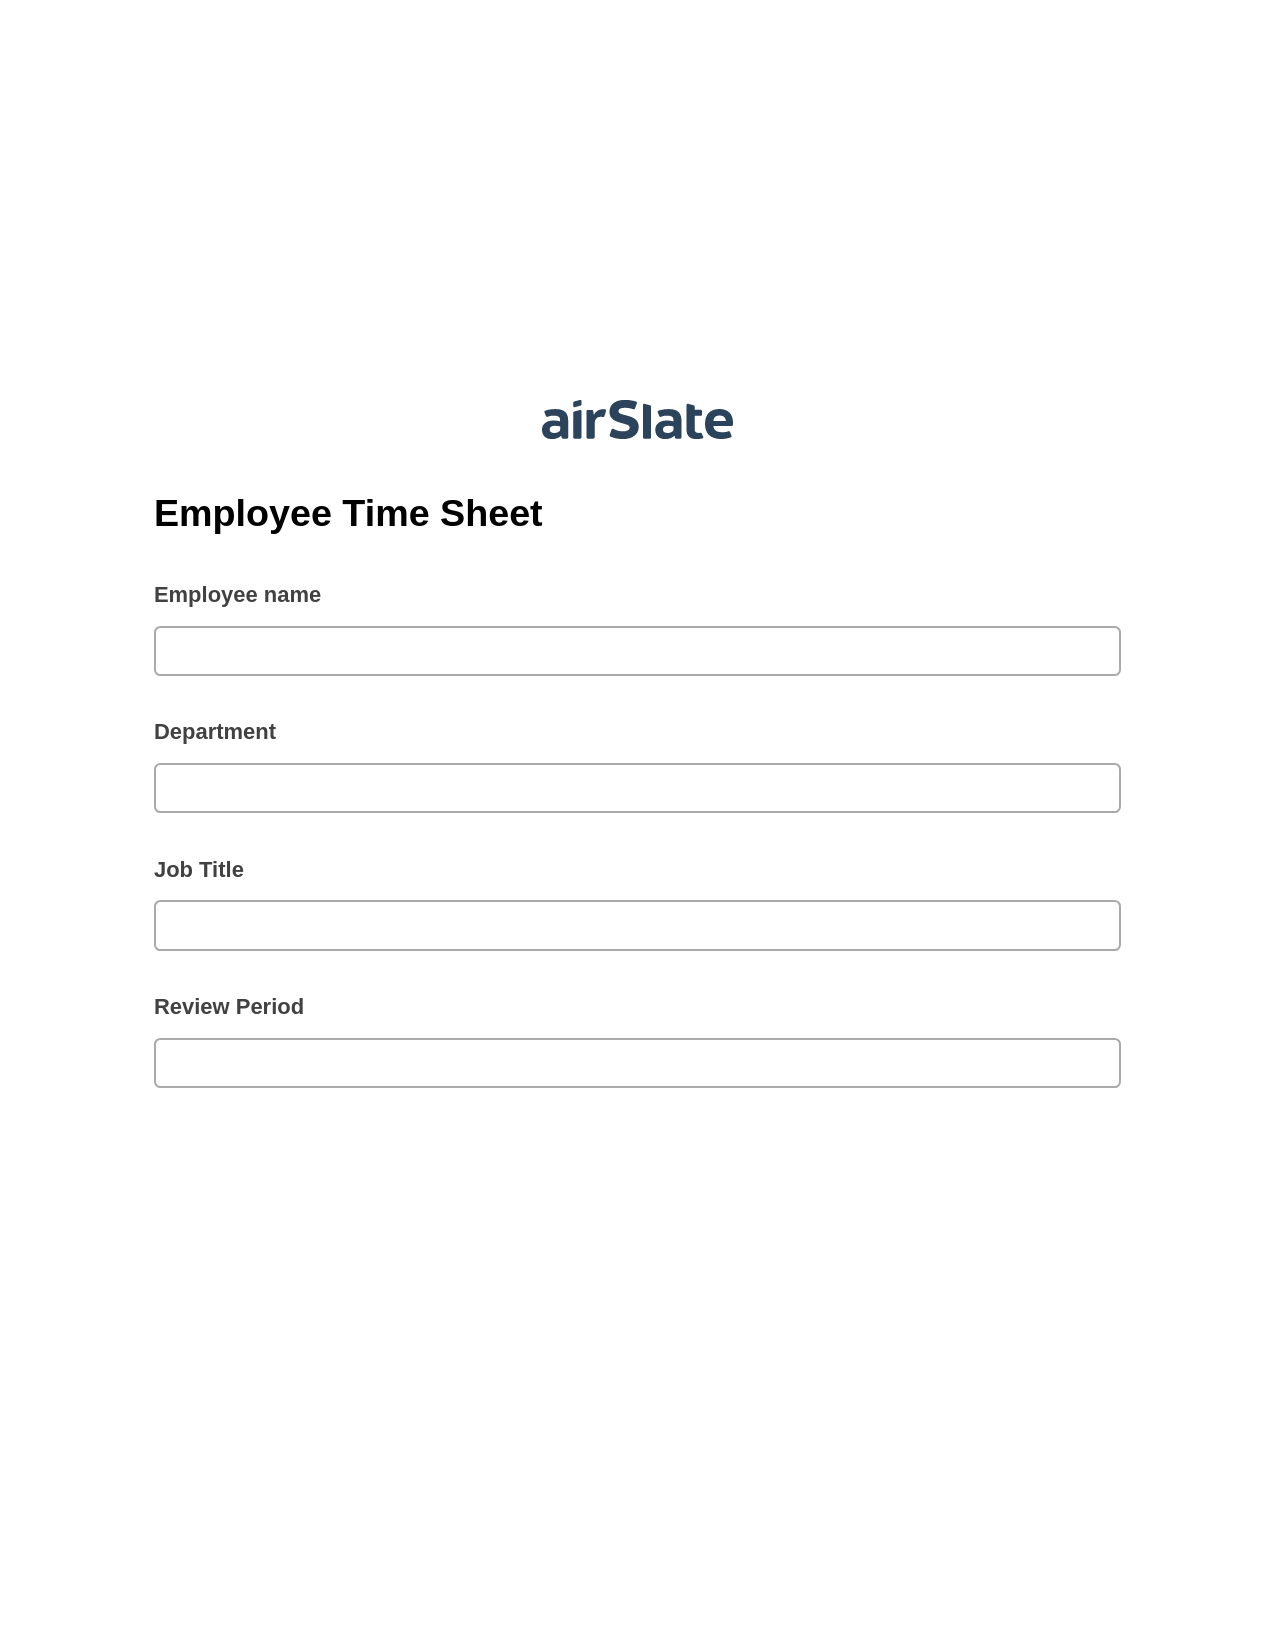 Employee Time Sheet Pre-fill from Smartsheet Bot, Update Audit Trail Bot, Archive to SharePoint Folder Bot